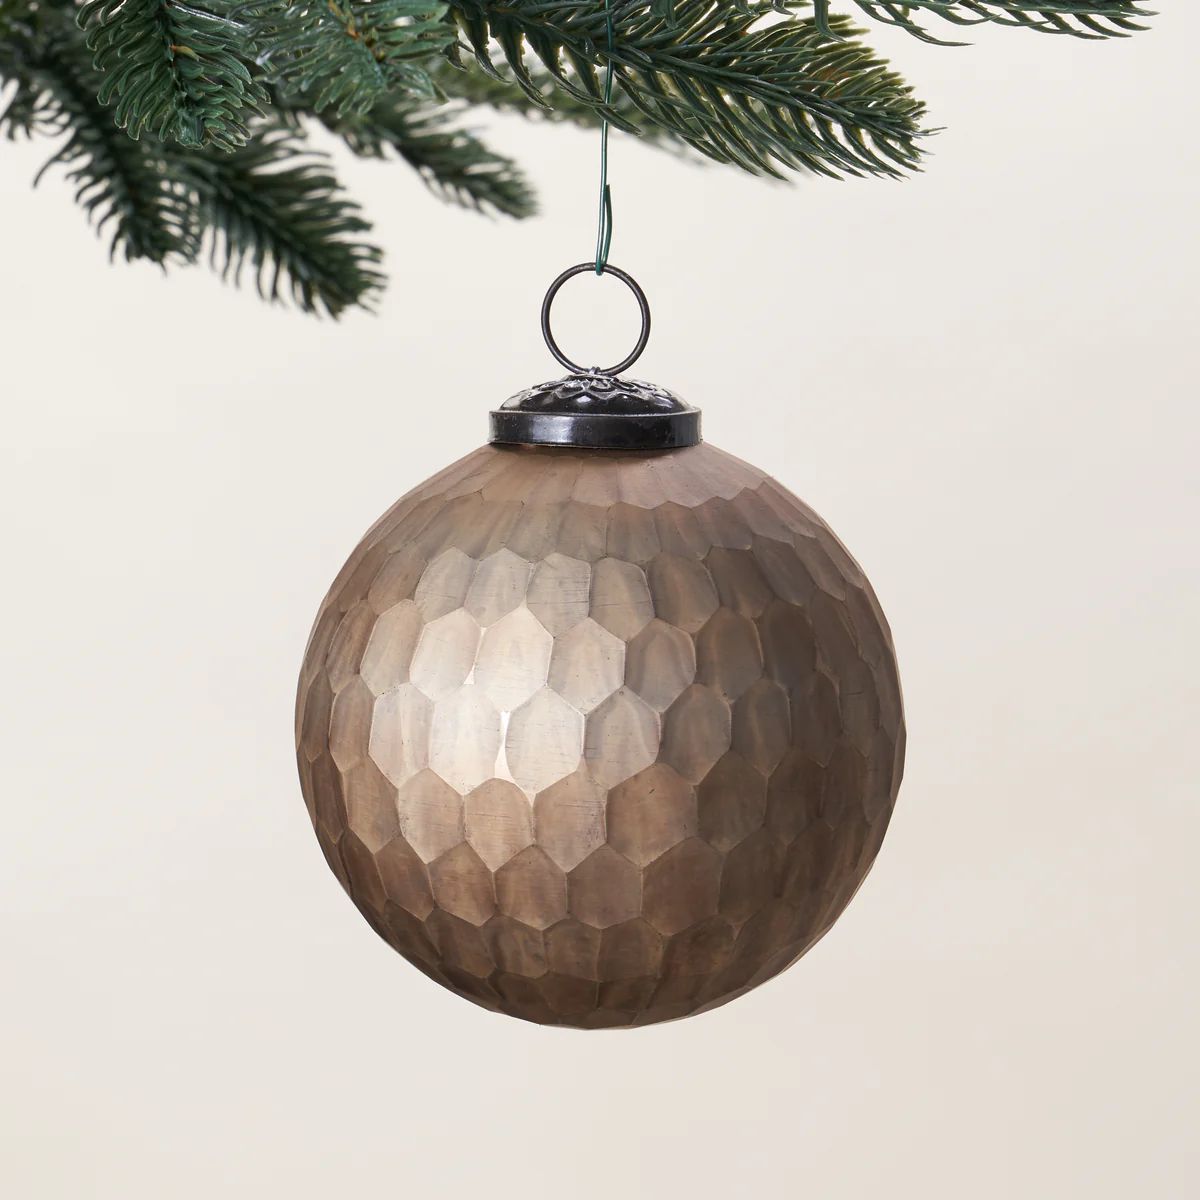 Honeycomb Ornament | Kate Marker Home